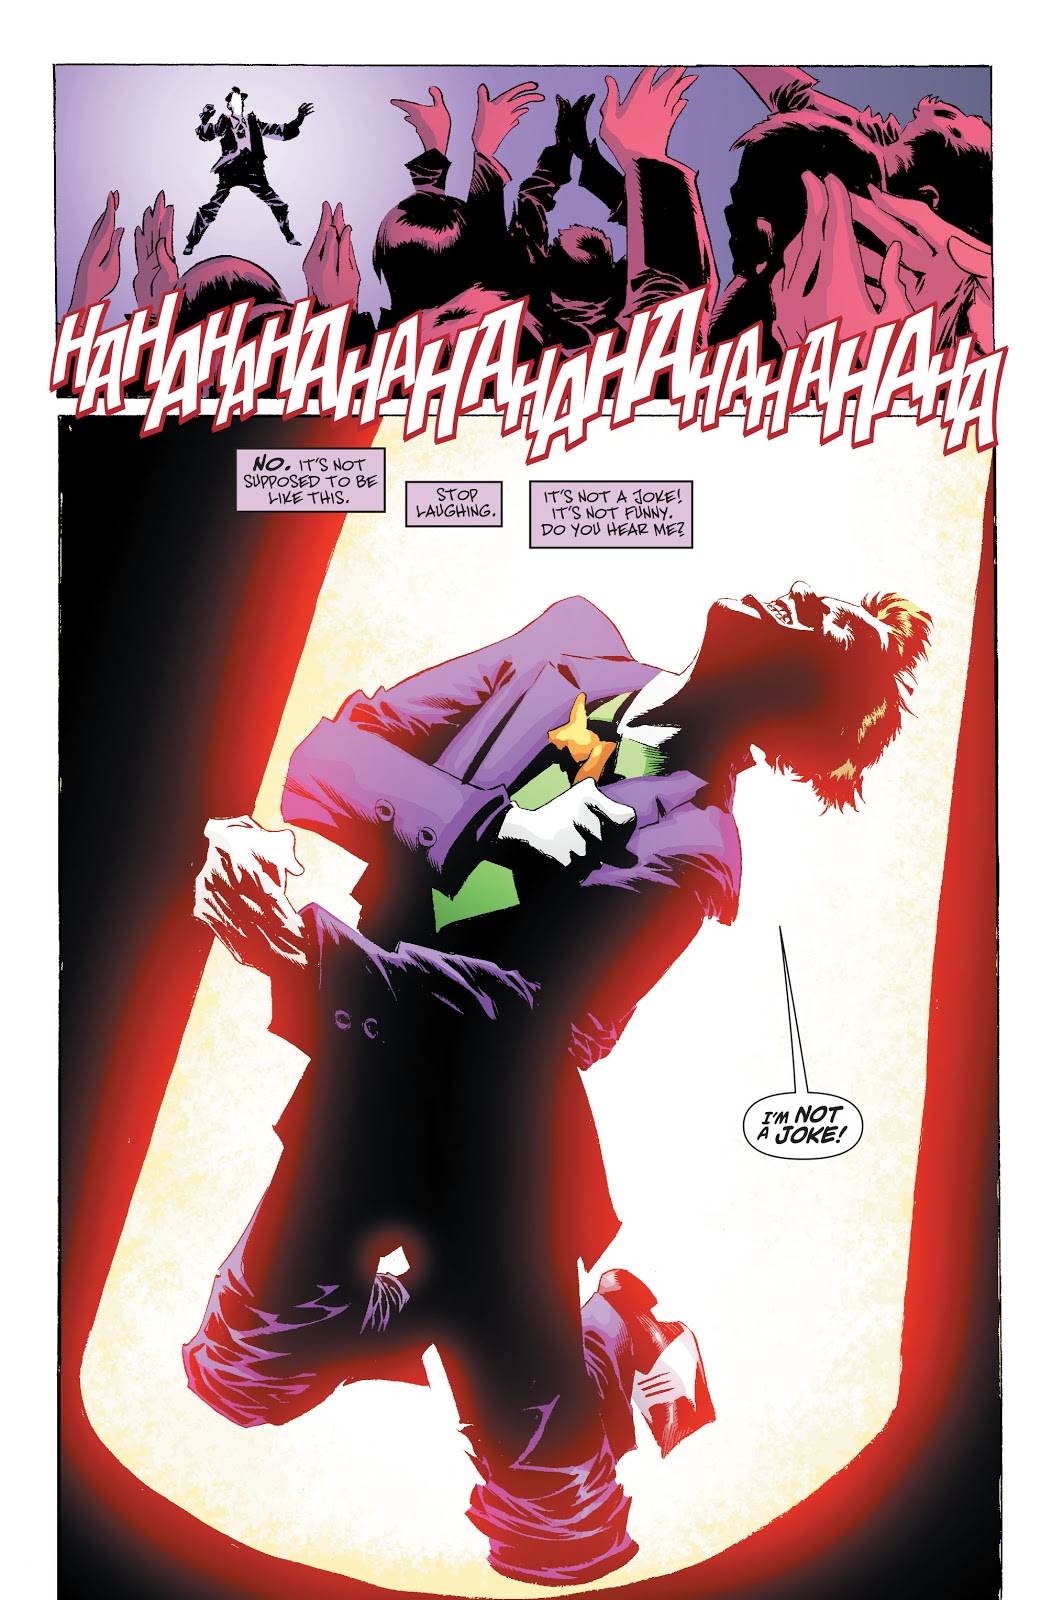 This image is from Superman/Batman Vol 1 #65 (2009), where the Joker is having a nightmare that he is being laughed at by an audience at the circus. 